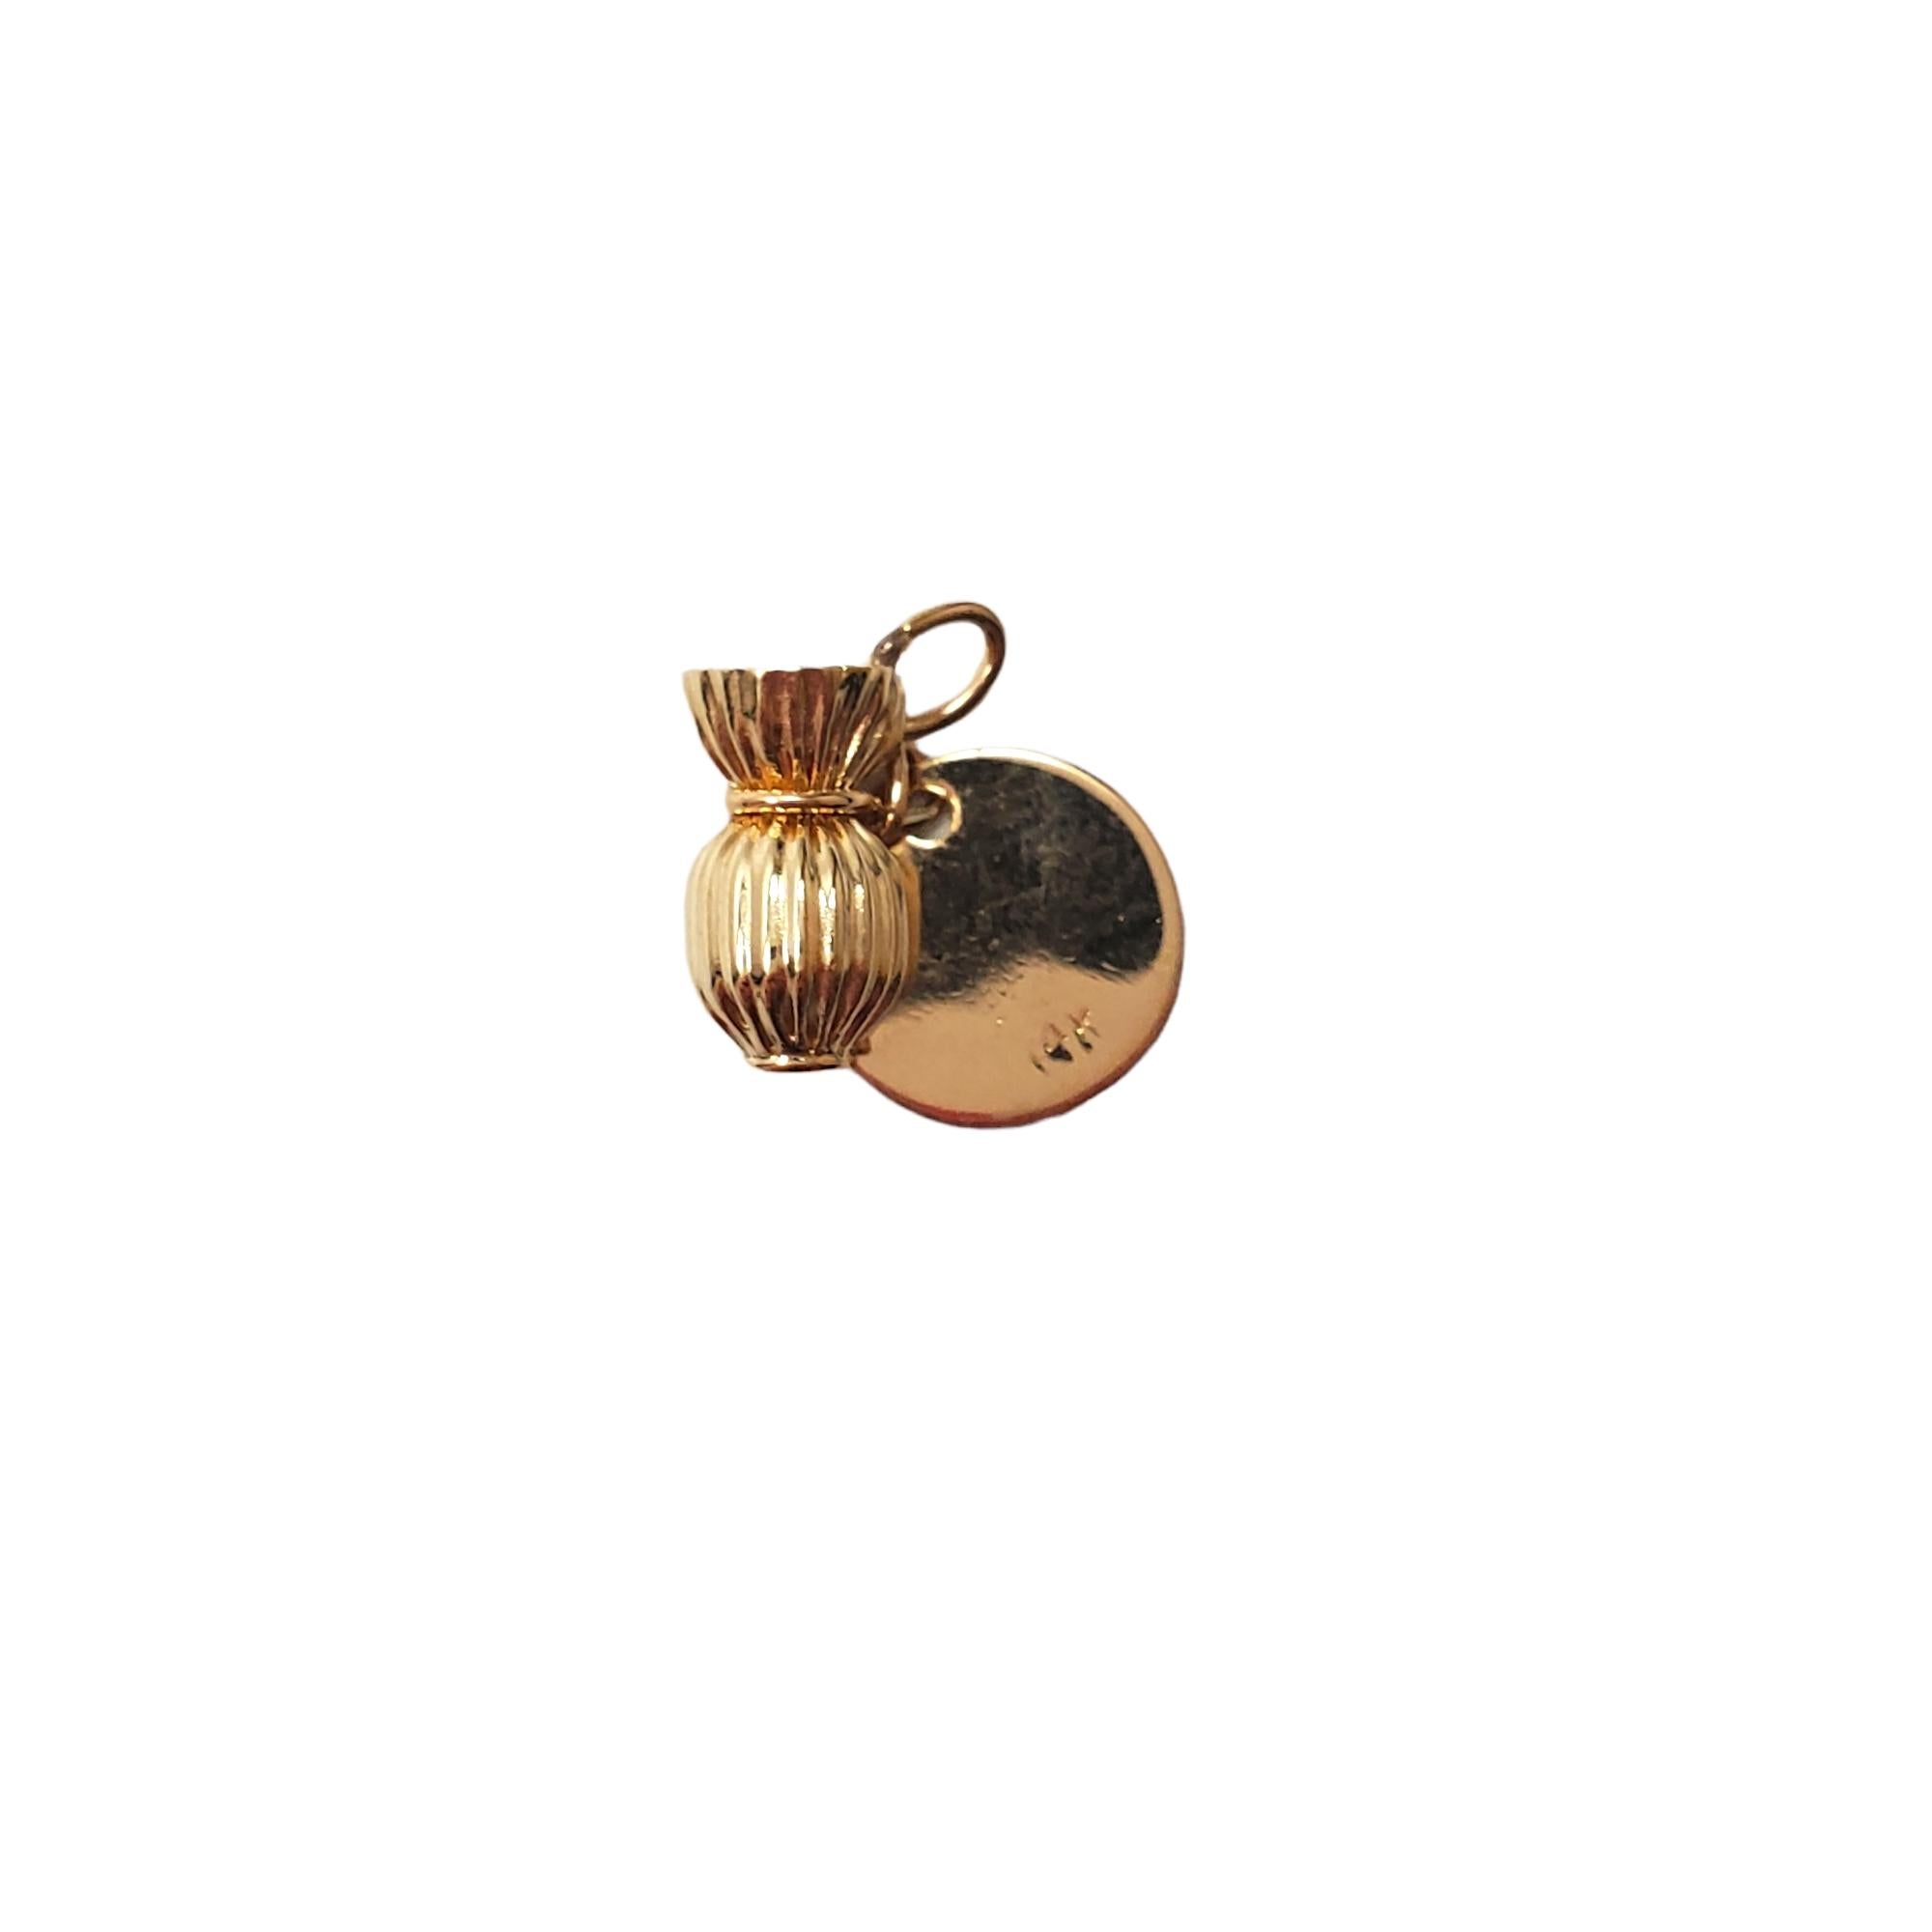 14K Yellow Gold Money Bag Charm

This meticulously detailed piece features a money bag charm with a dangling dollar sign symbol.

Size: 10.9 mm X 6.19 mm

Weight: 0.9 g/ 0.5 dwt

Hallmark: 14K

Very good condition, professionally polished.

Will